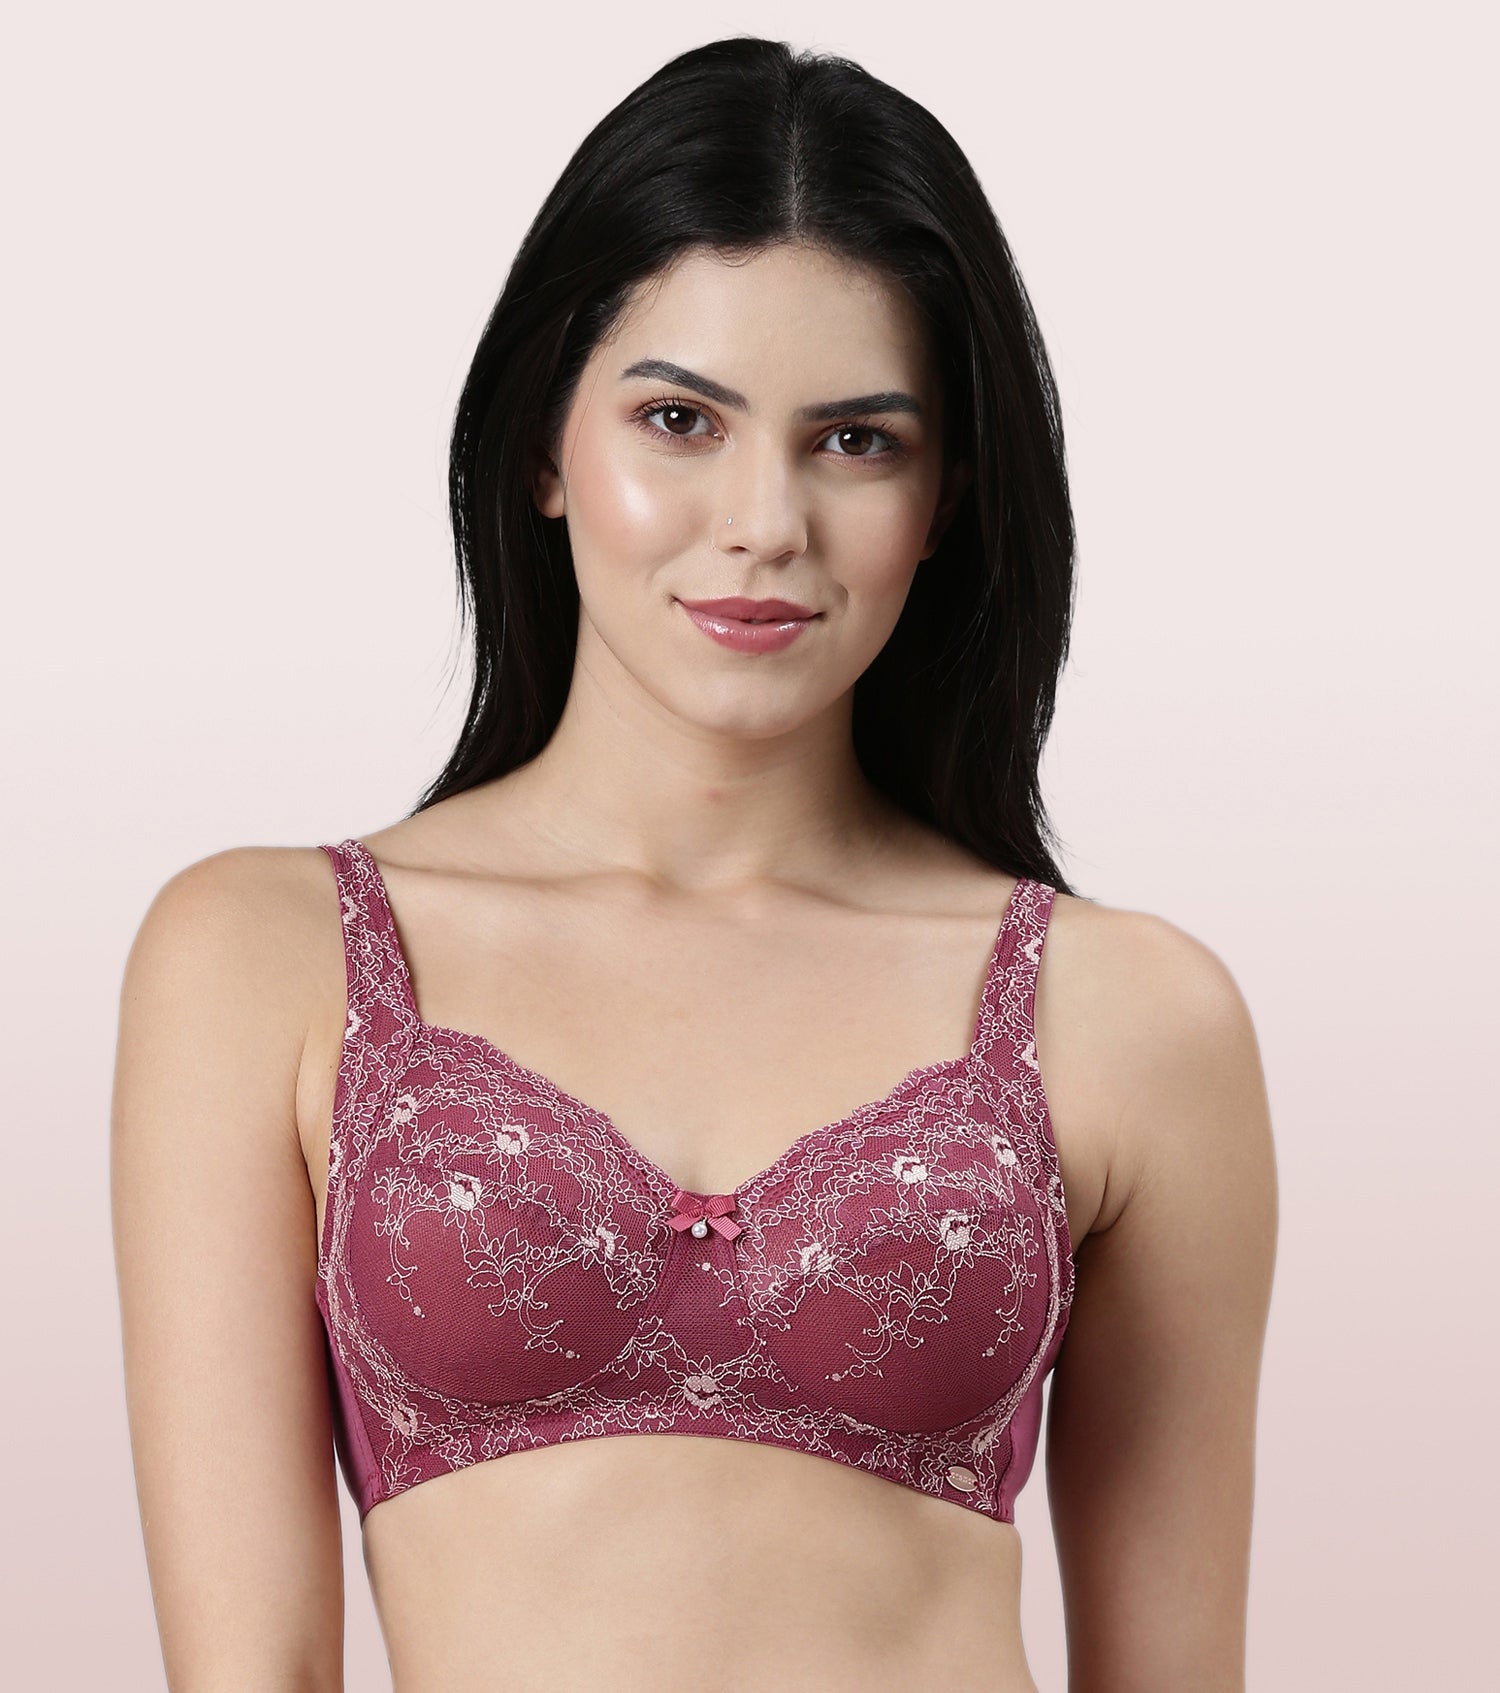 Enamor F129
LACE CONTOUR BRA
NON-PADDED WIREFREE HIGH COVERAGE